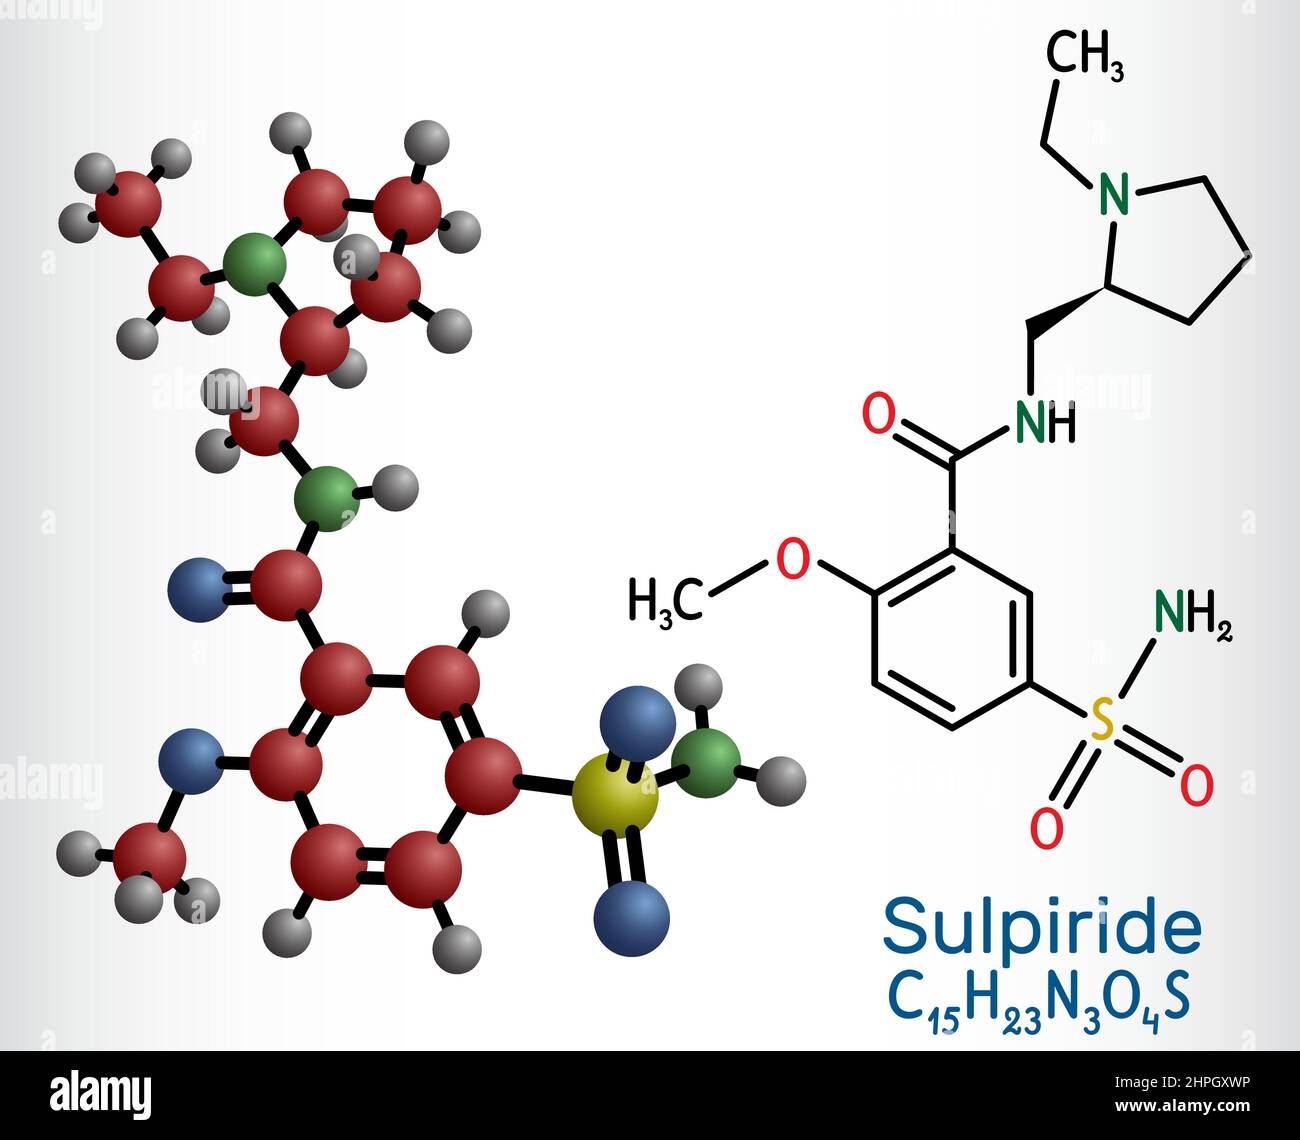 Sulpiride molecule. It is antipsychotic, neuroleptic medication for the treatment of acute and chronic schizophrenia. Structural chemical formula and Stock Vector